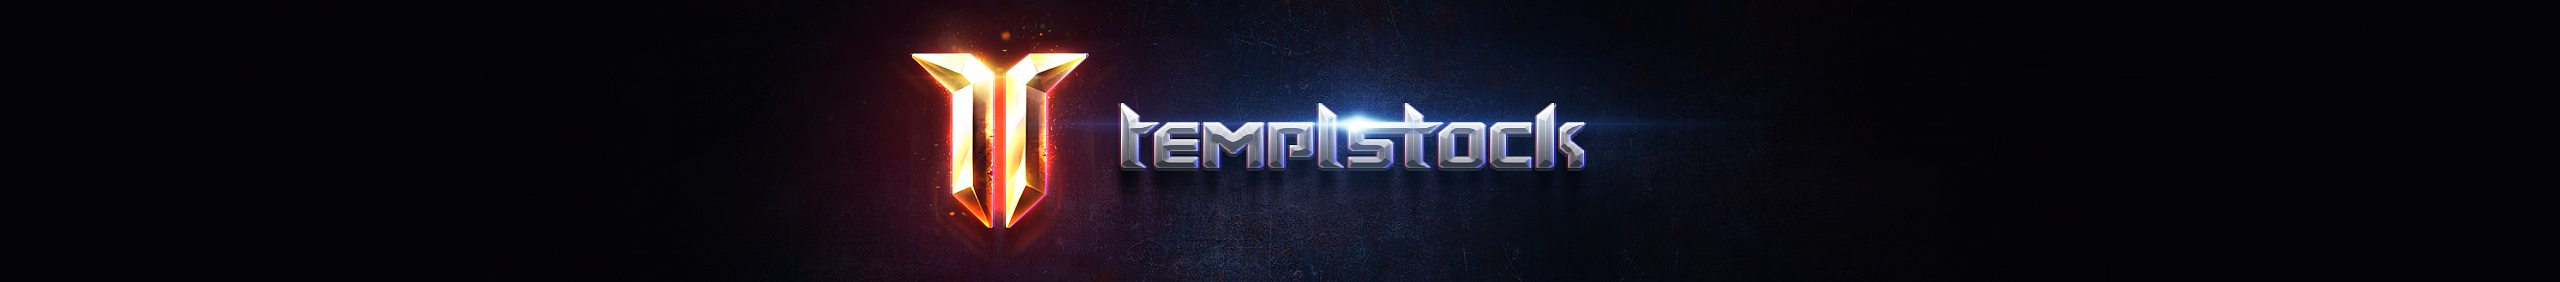 Game Templates's profile banner